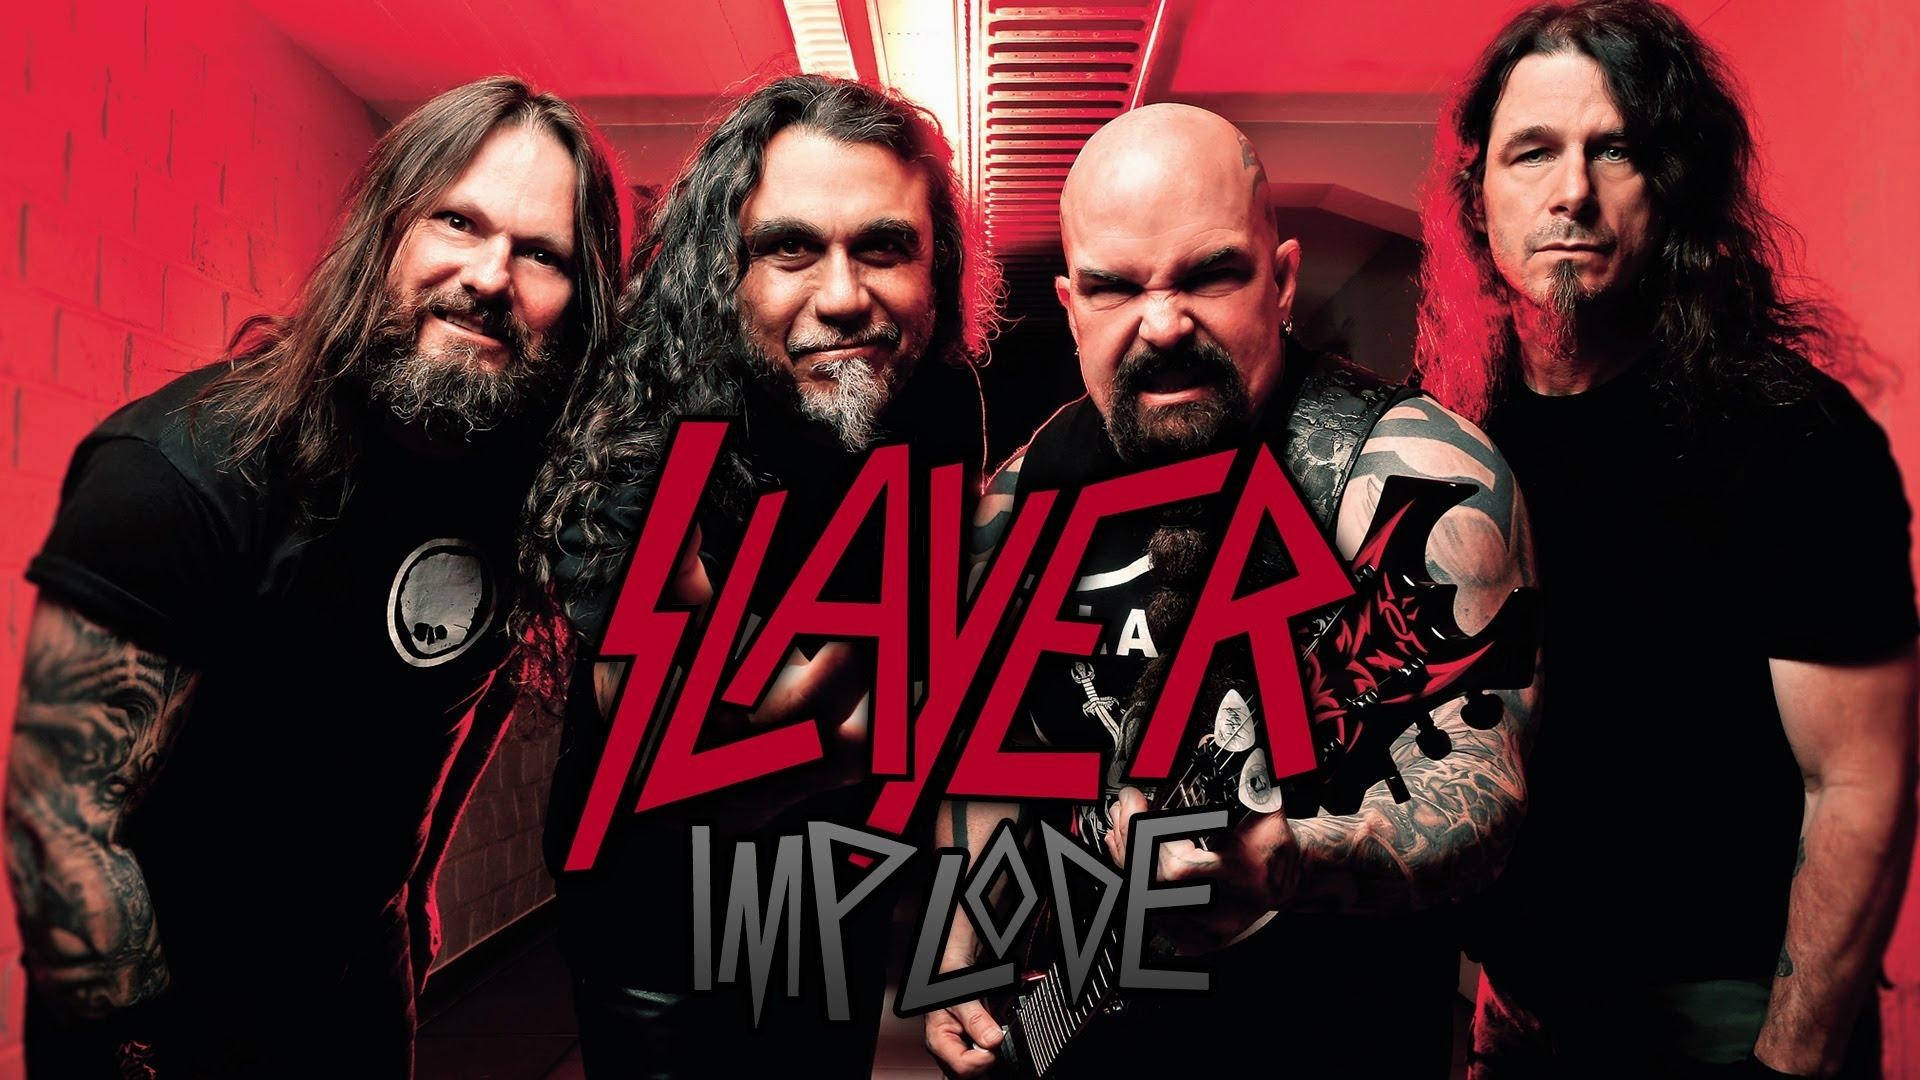 Free Slayer Wallpaper Downloads, [100+] Slayer Wallpapers for FREE |  